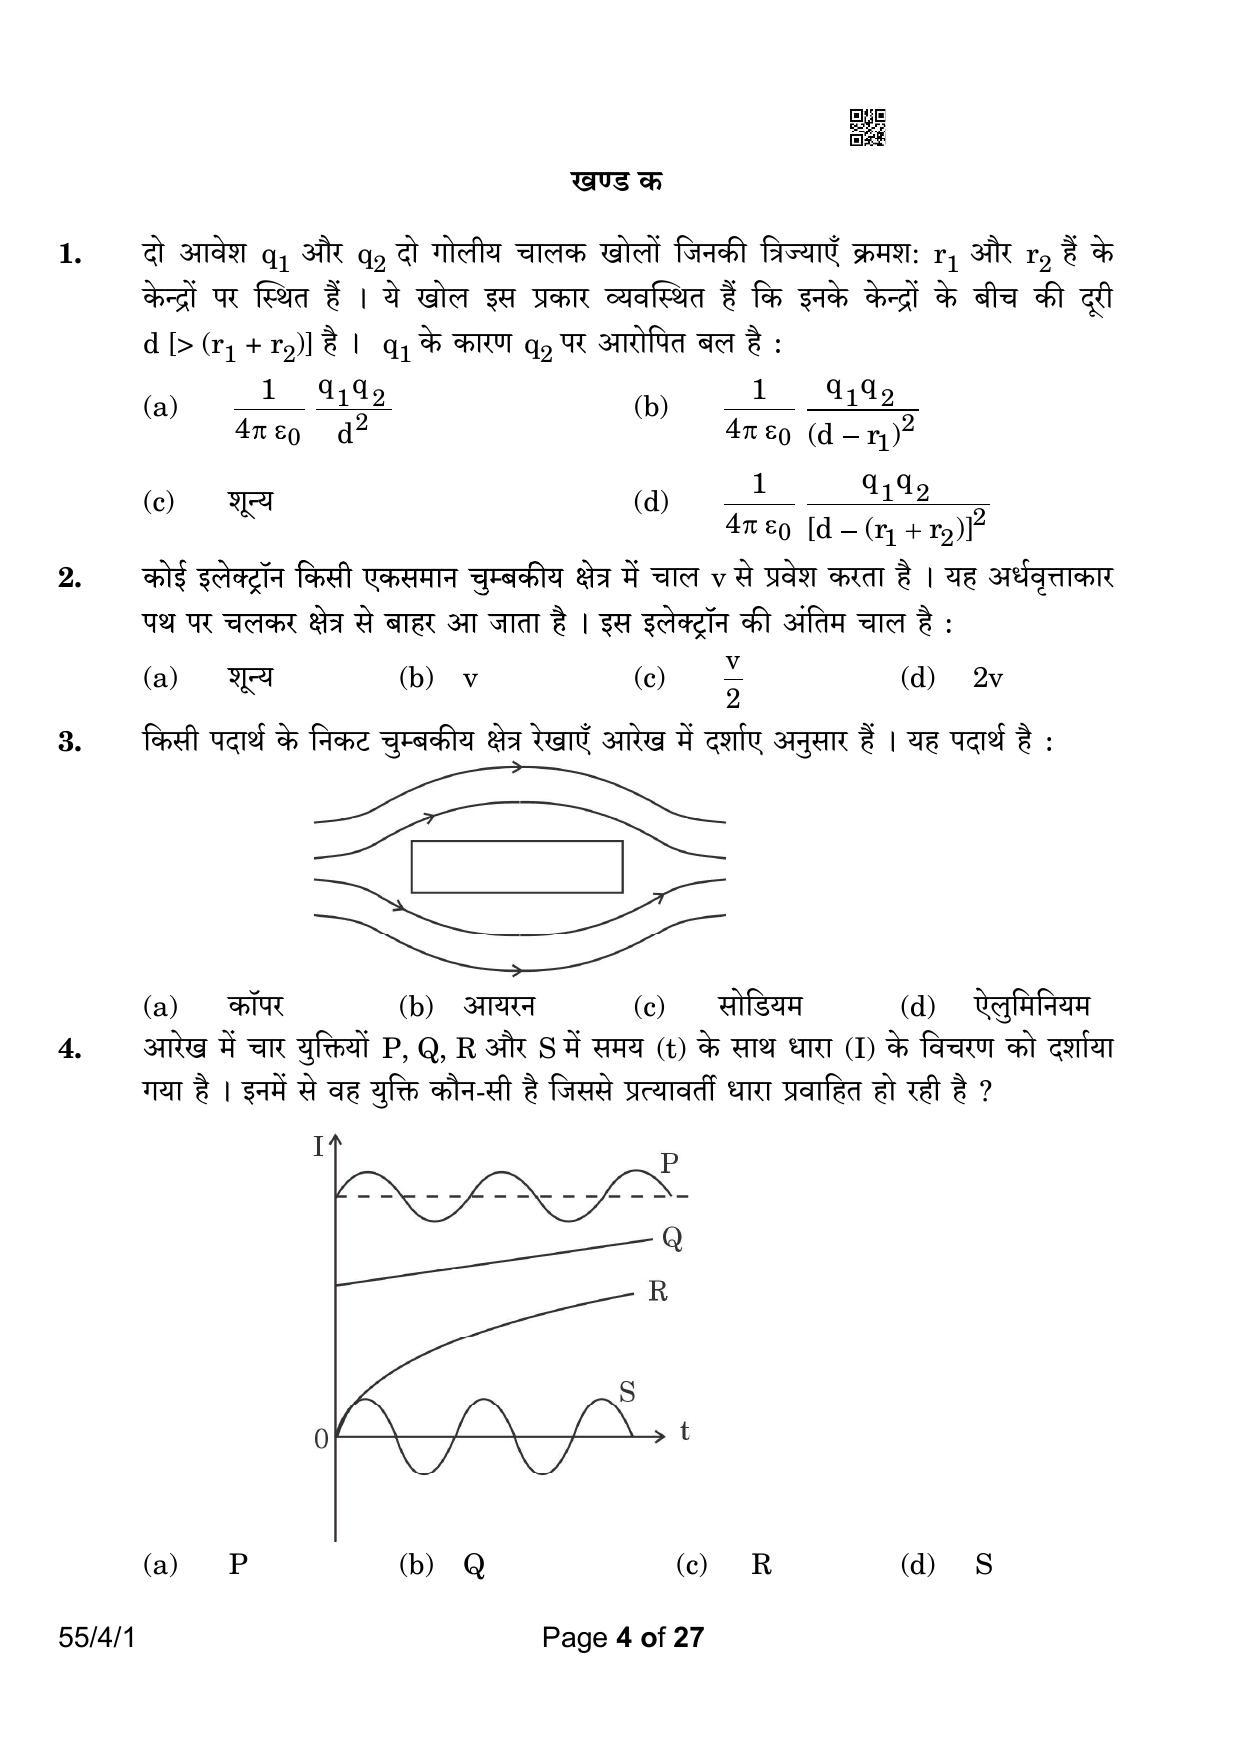 CBSE Class 12 55-4-1 Physics 2023 Question Paper - Page 4